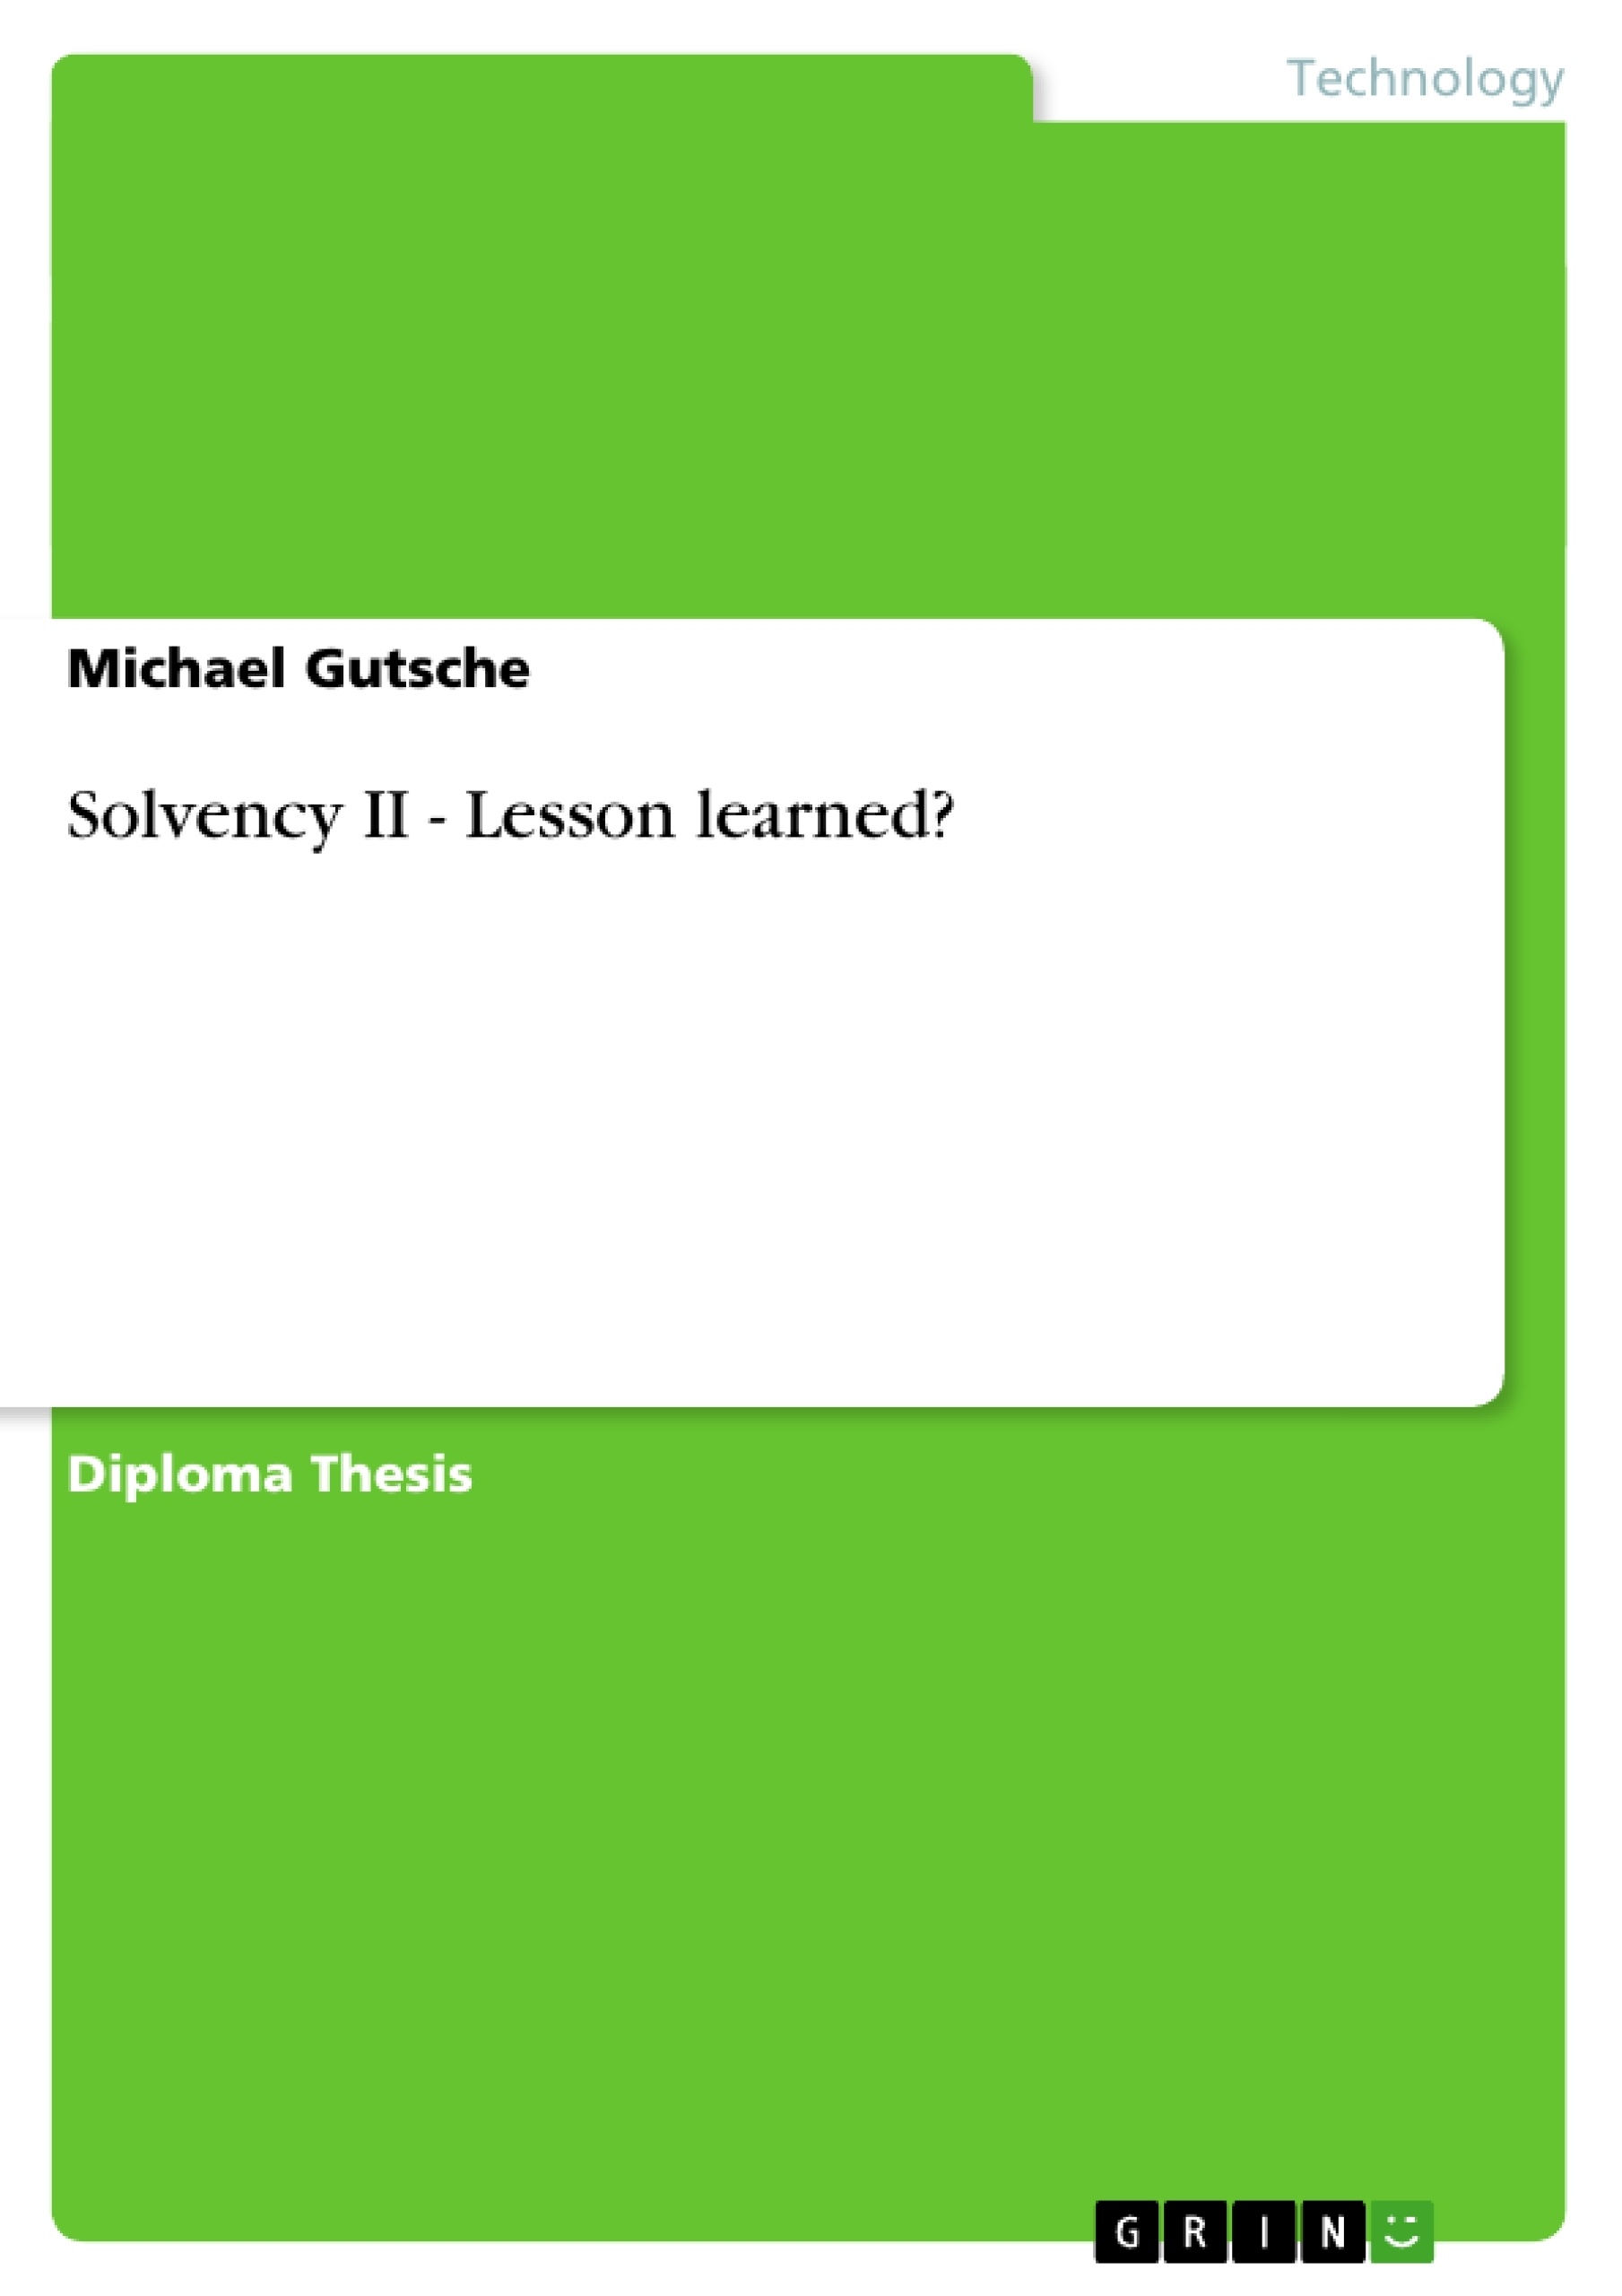 Título: Solvency II - Lesson learned?